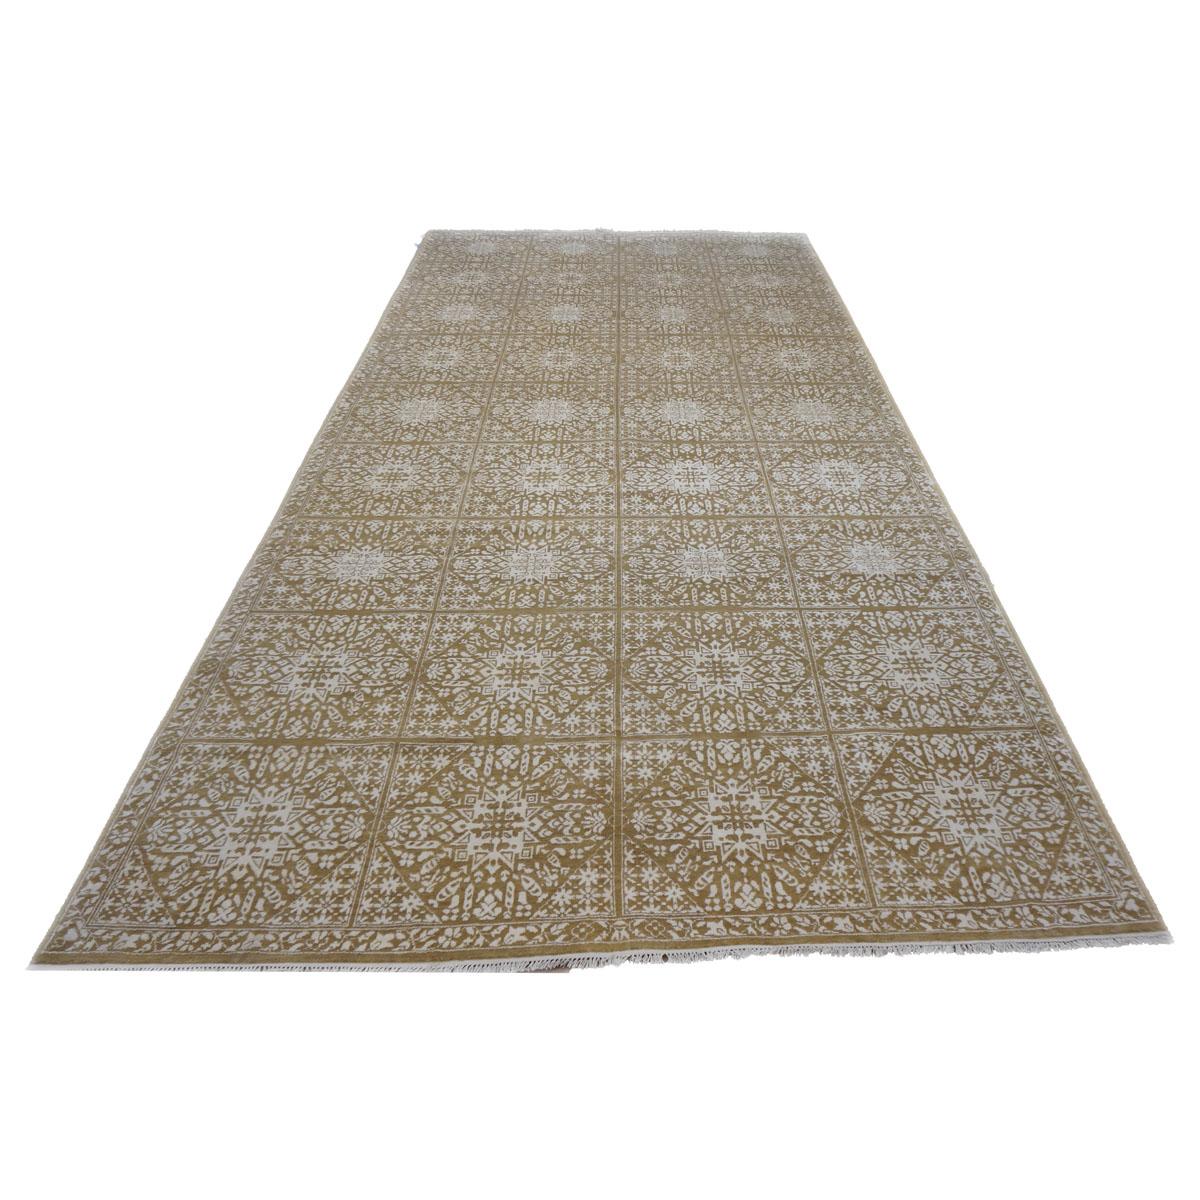 Ashly Fine Rugs presents a New Modern Inspired wool & silk 9x18 White Silk & Tan Wool Handmade Area Rug with lustrous shiny fibers and a thick durable pile. This gorgeous collection has been designed by our in-house designer and was 100% handmade by